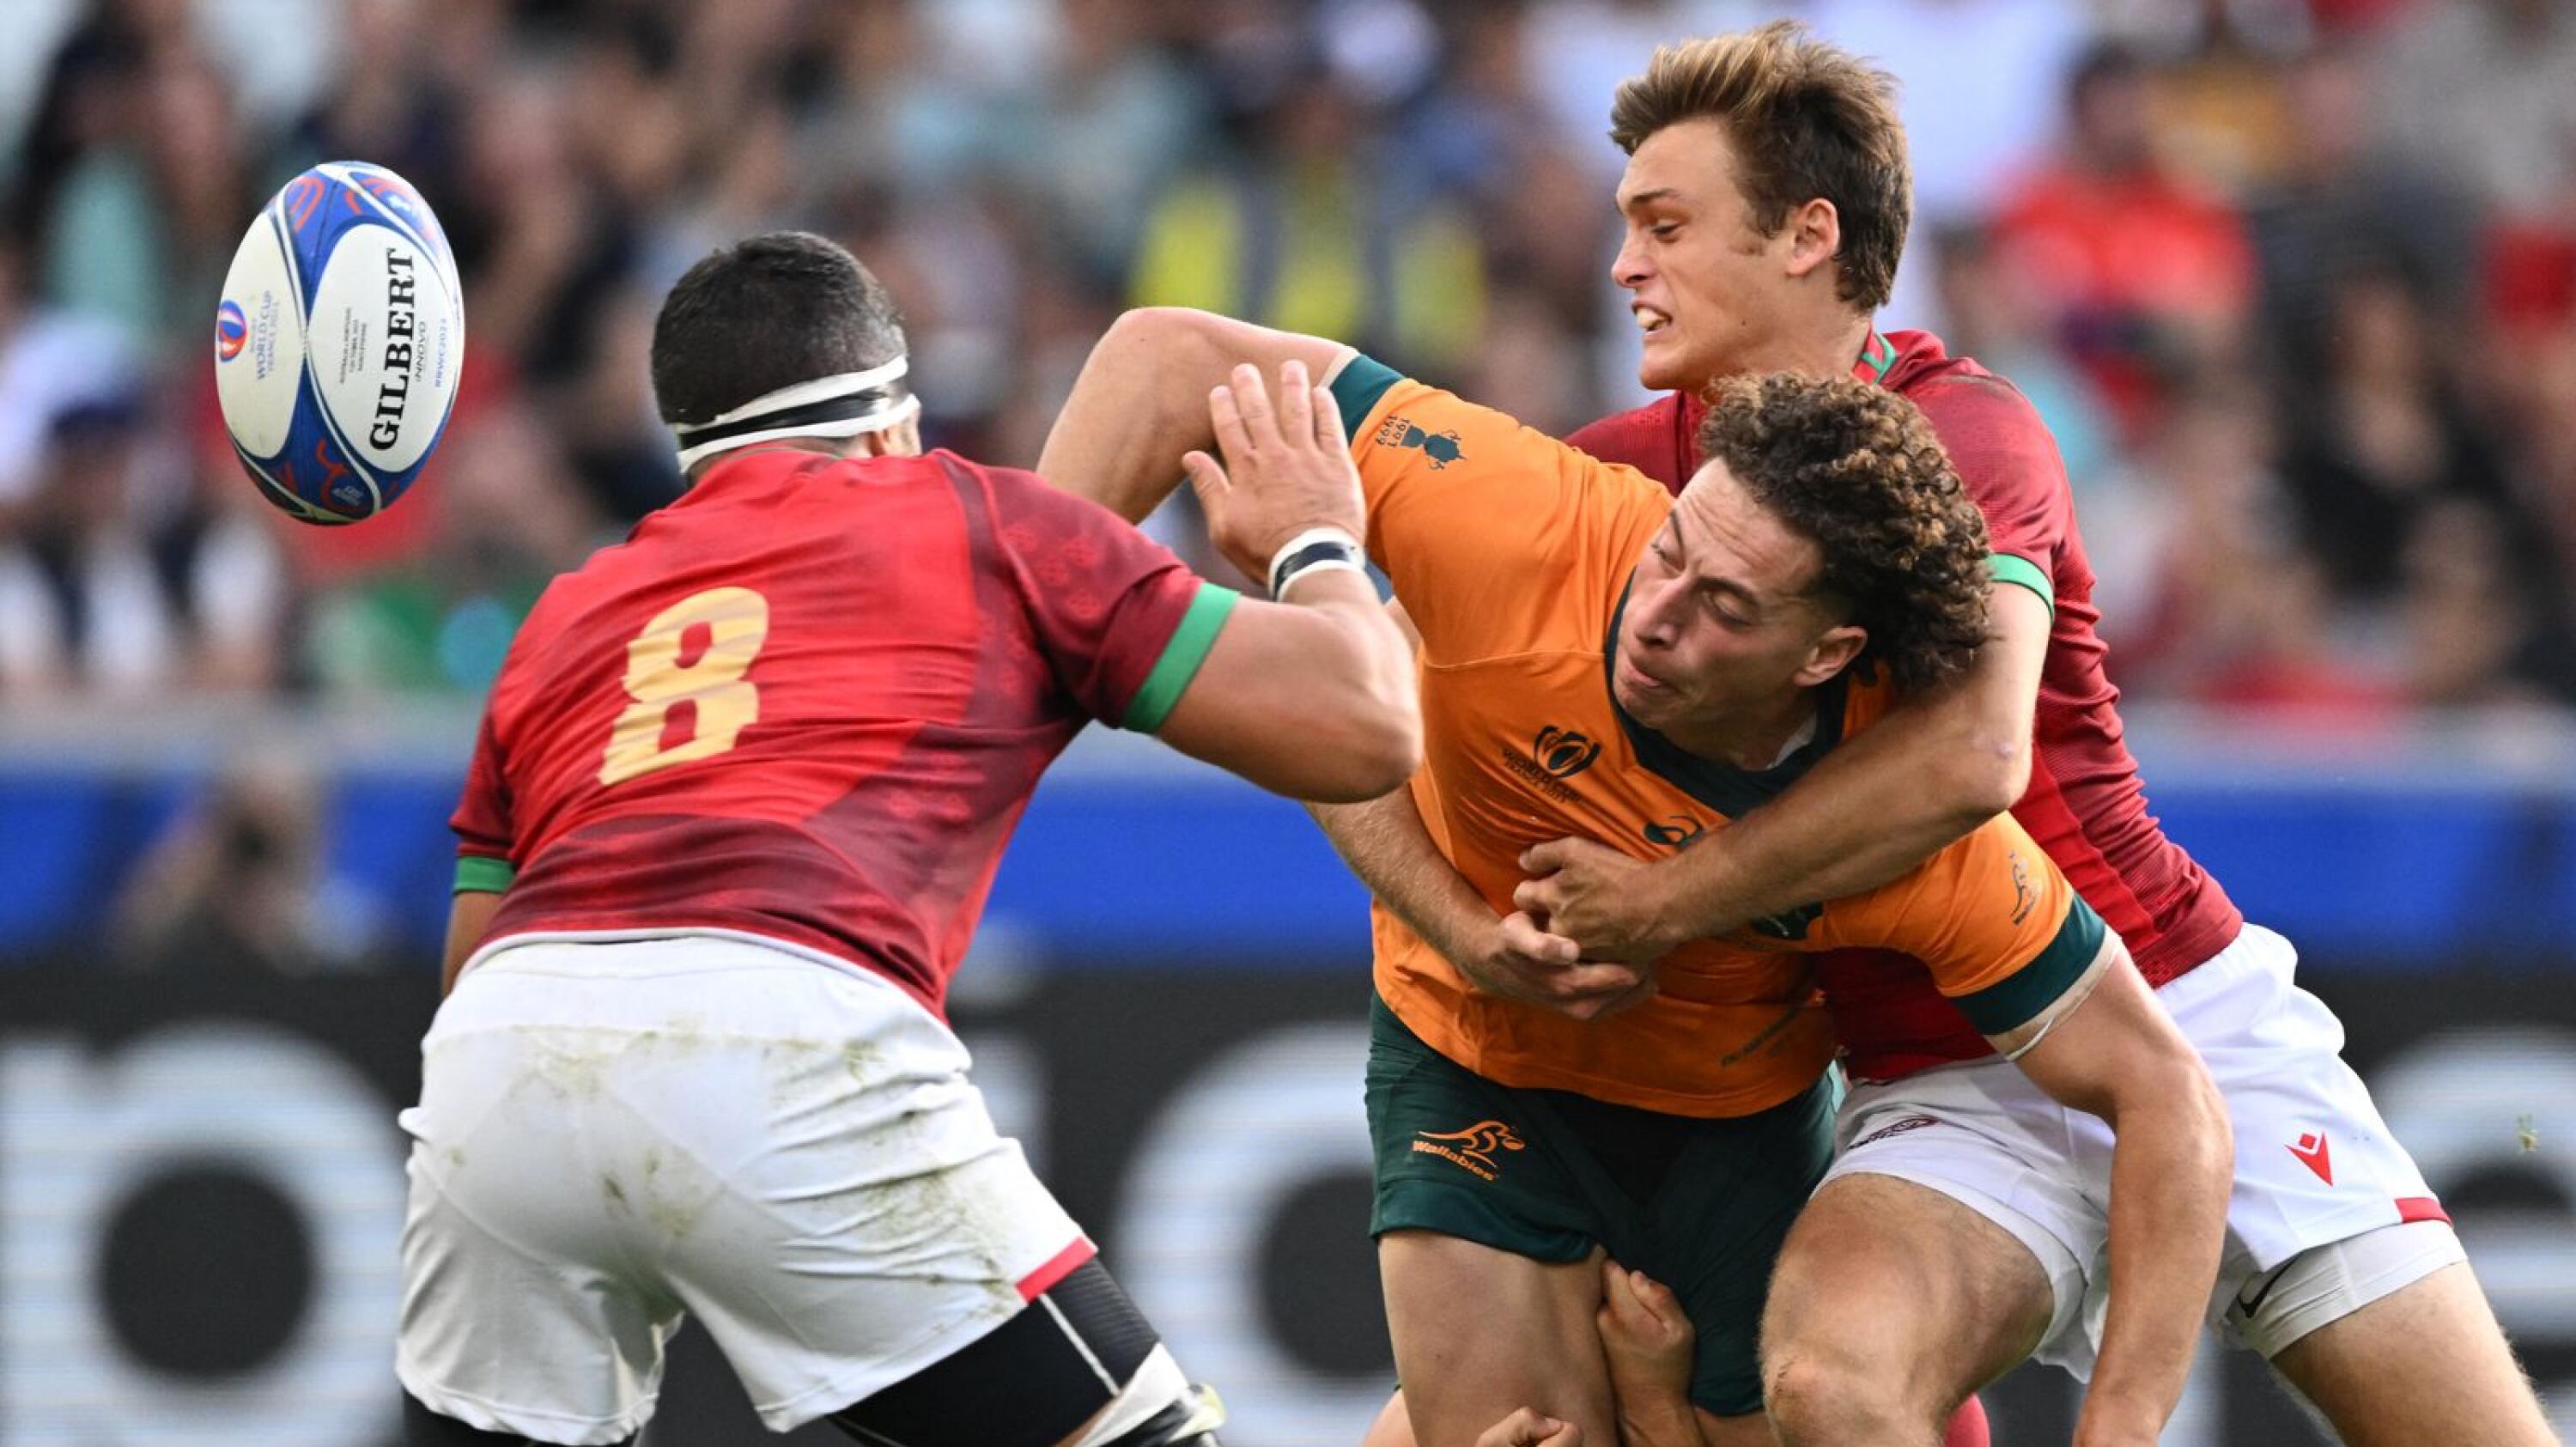 Australia's Mark Nawaqanitawase is tackled by Portugal's Jeronimo Portela and Thibault de Freitas during their Rugby World Cup Pool C match